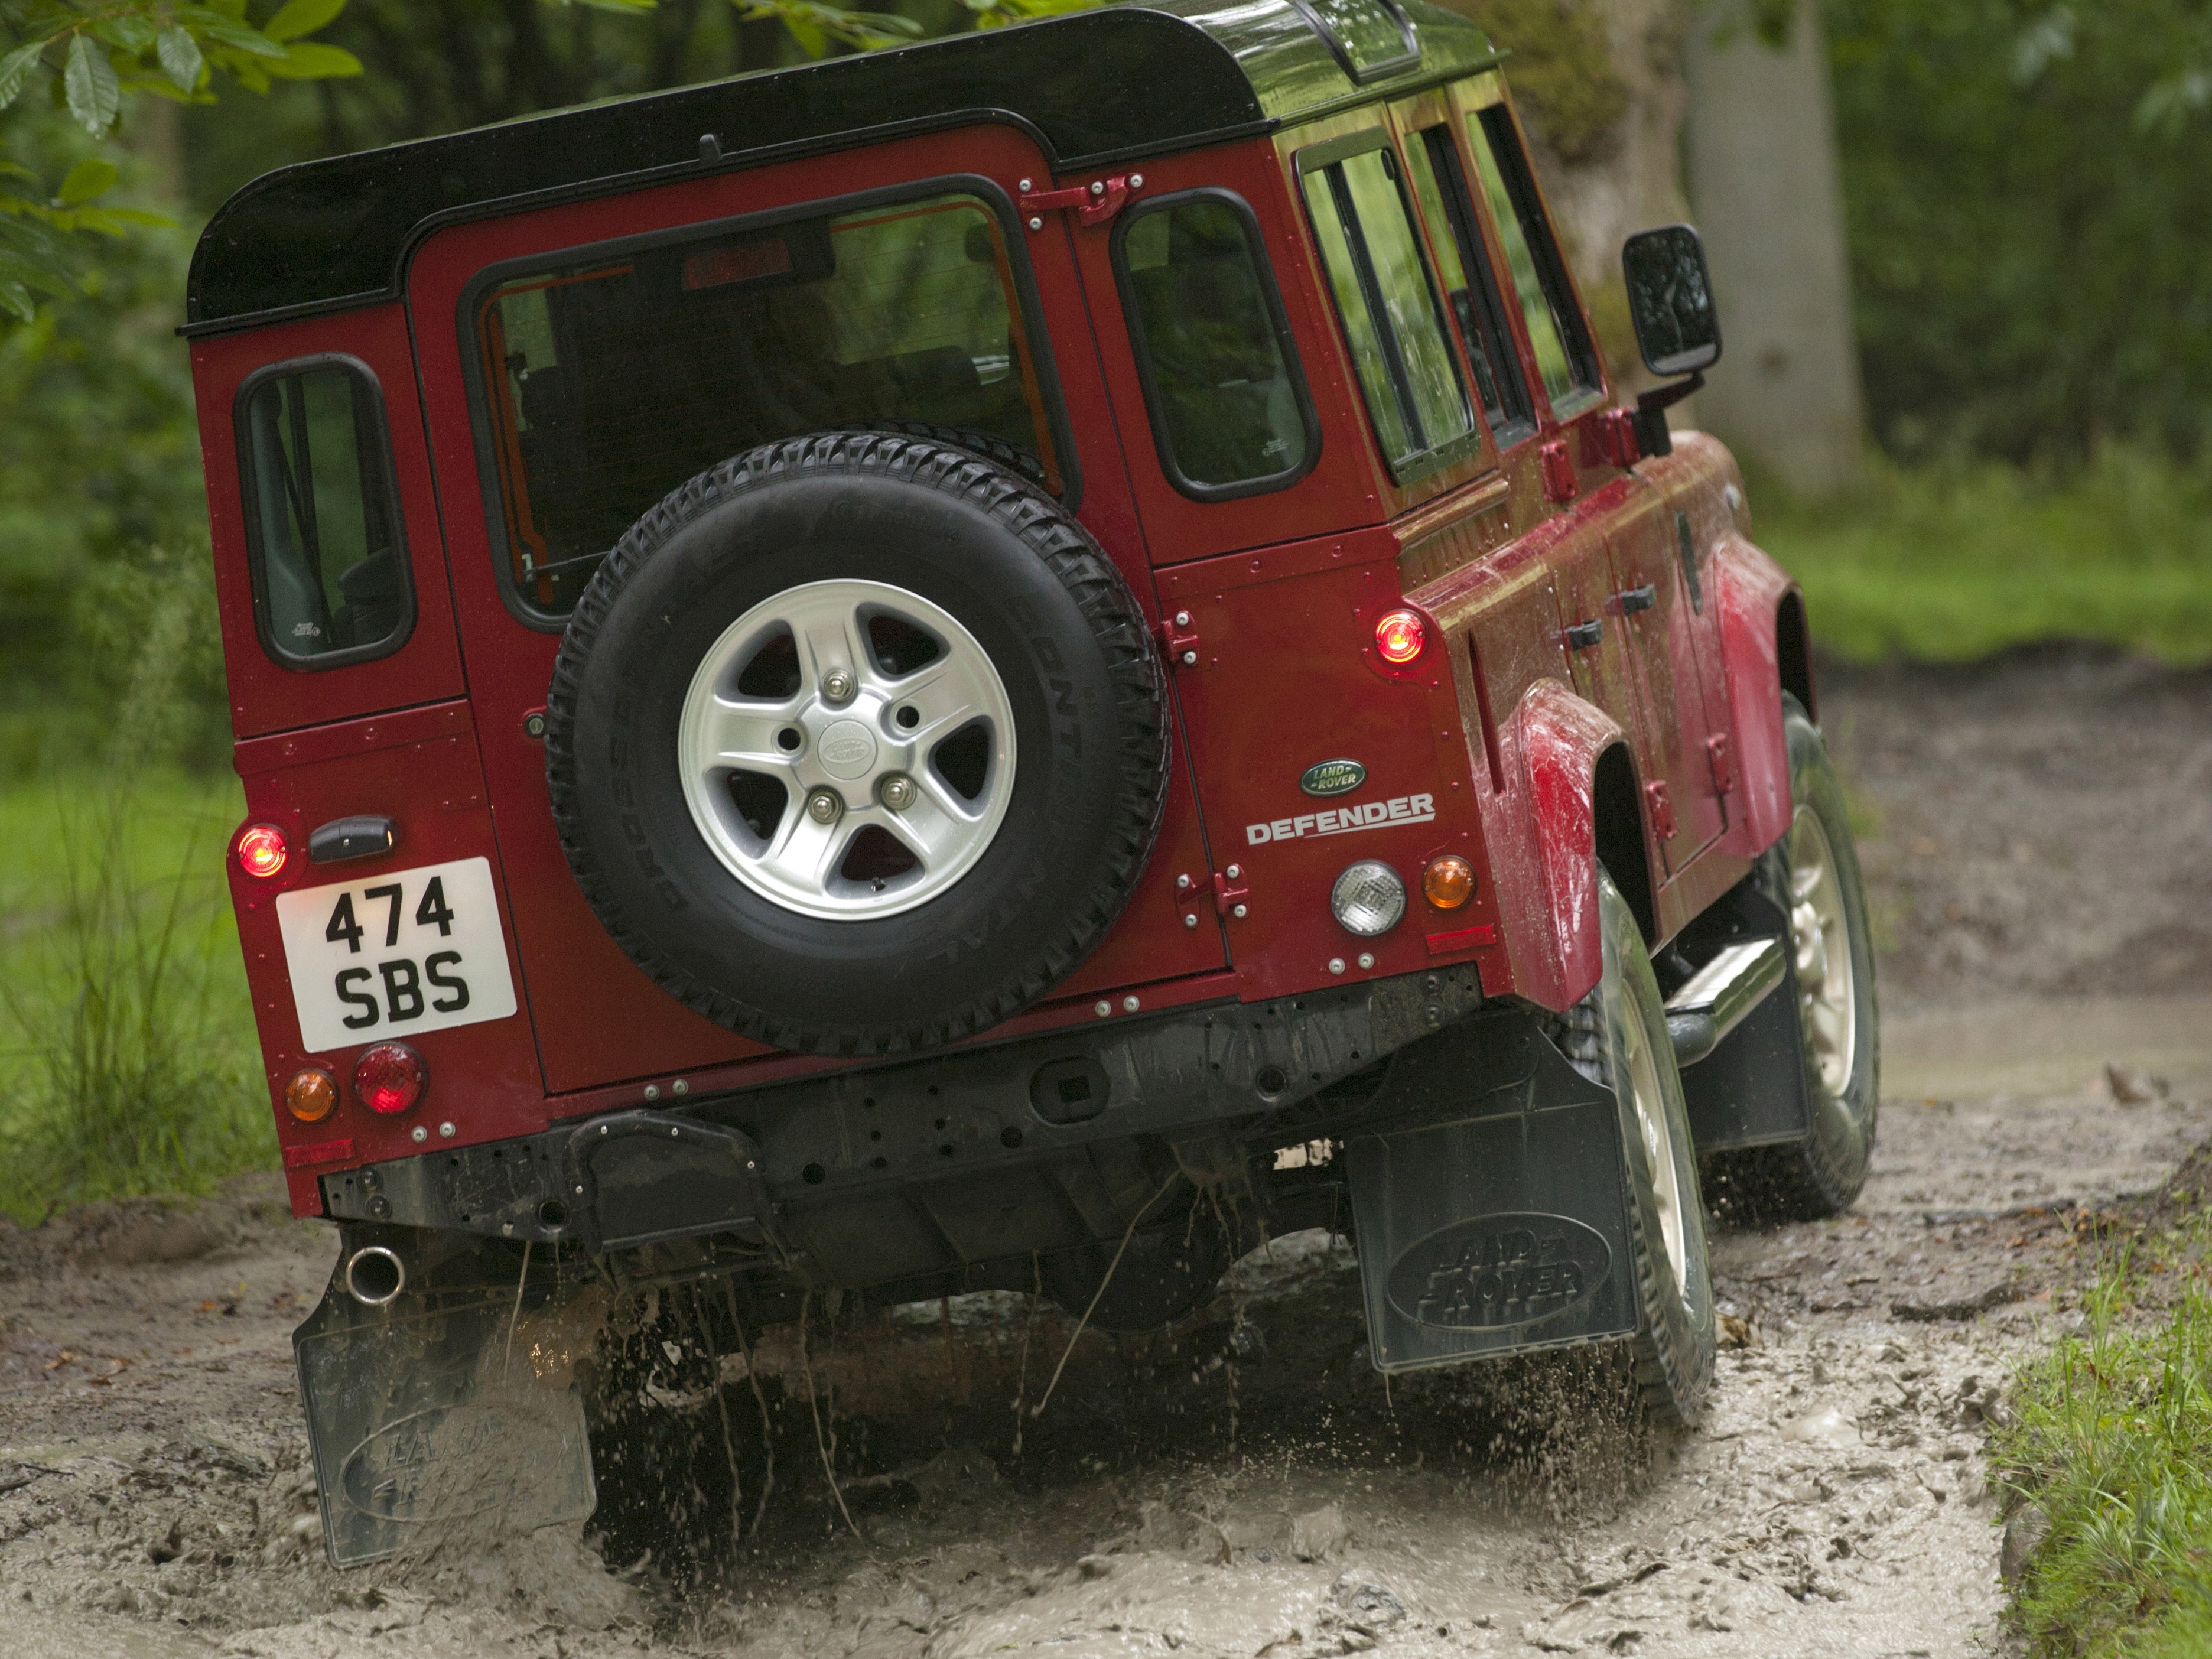 land rover defender, vehicles, land rover iphone wallpaper